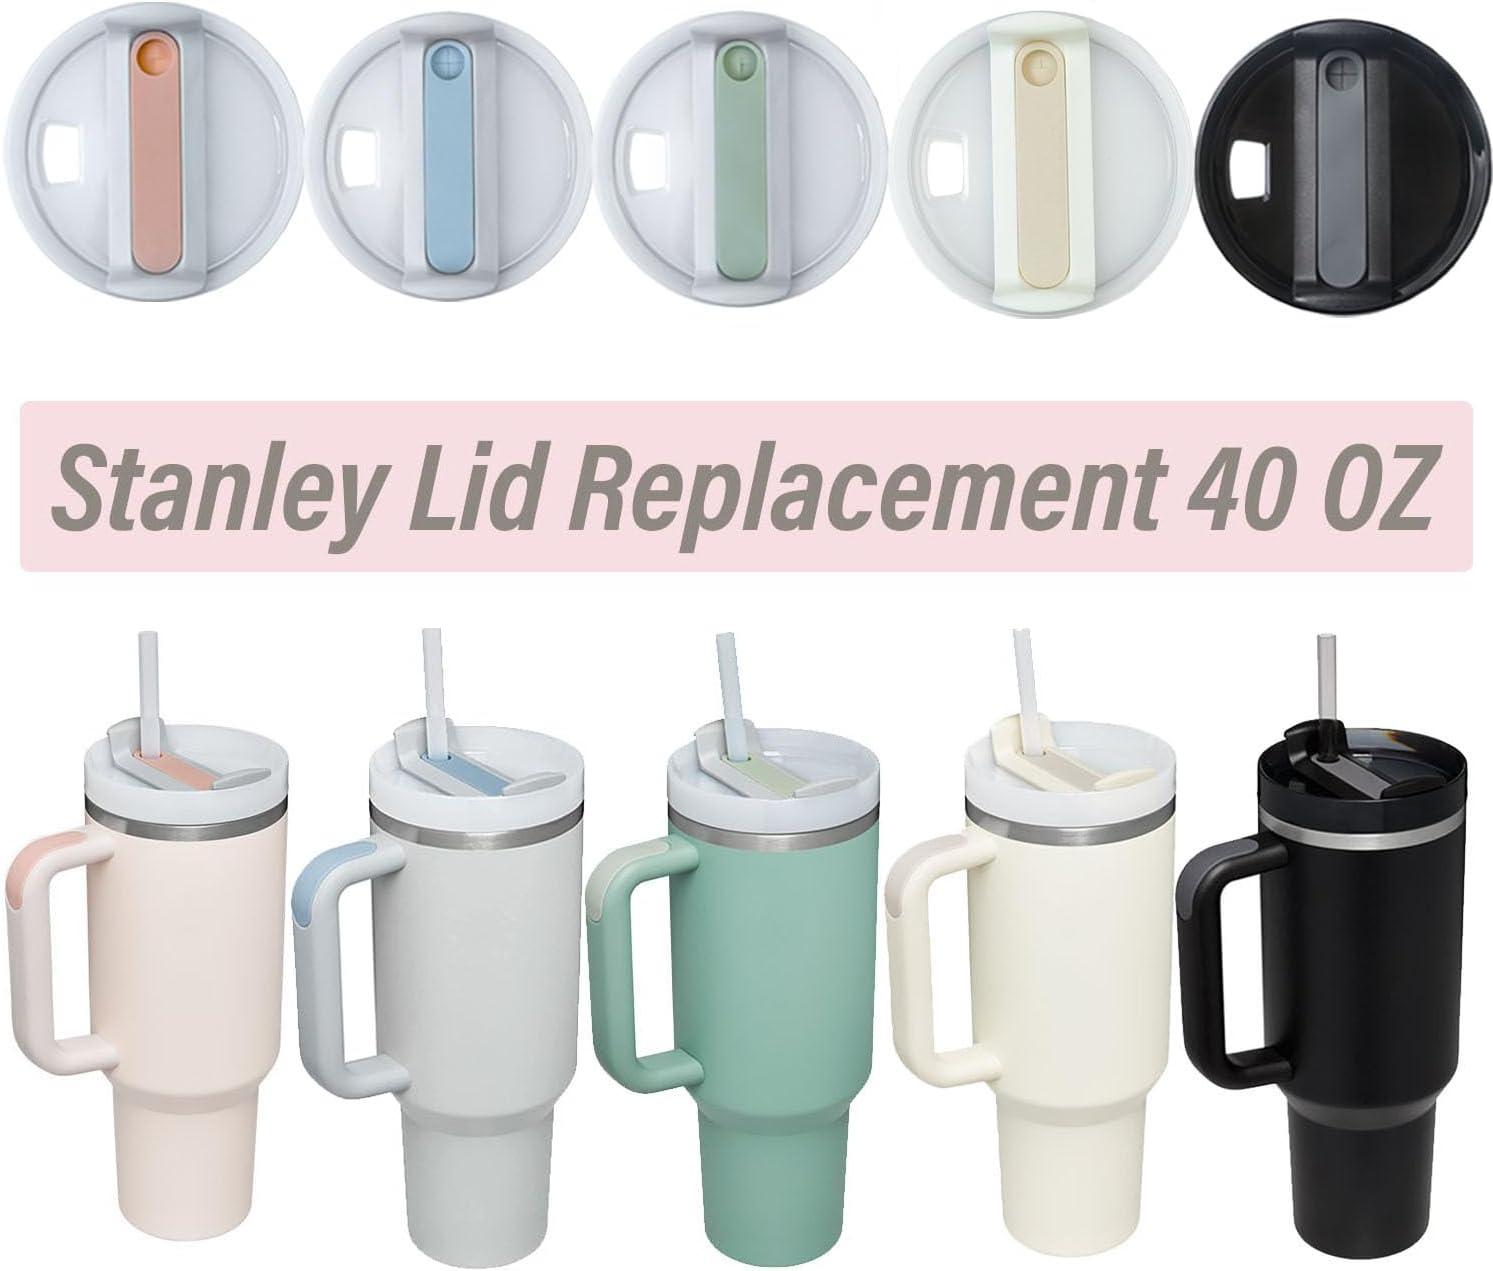  Stanley Cup Lids, 9 Pack Stanley Replacement Lid Accessories  For Stanley Tumbler Cup 40 Oz 2.0 And Other Tumbler 40 Oz, Including Straw  Cover Cap, Replacement Straws And Lid Spill Plug